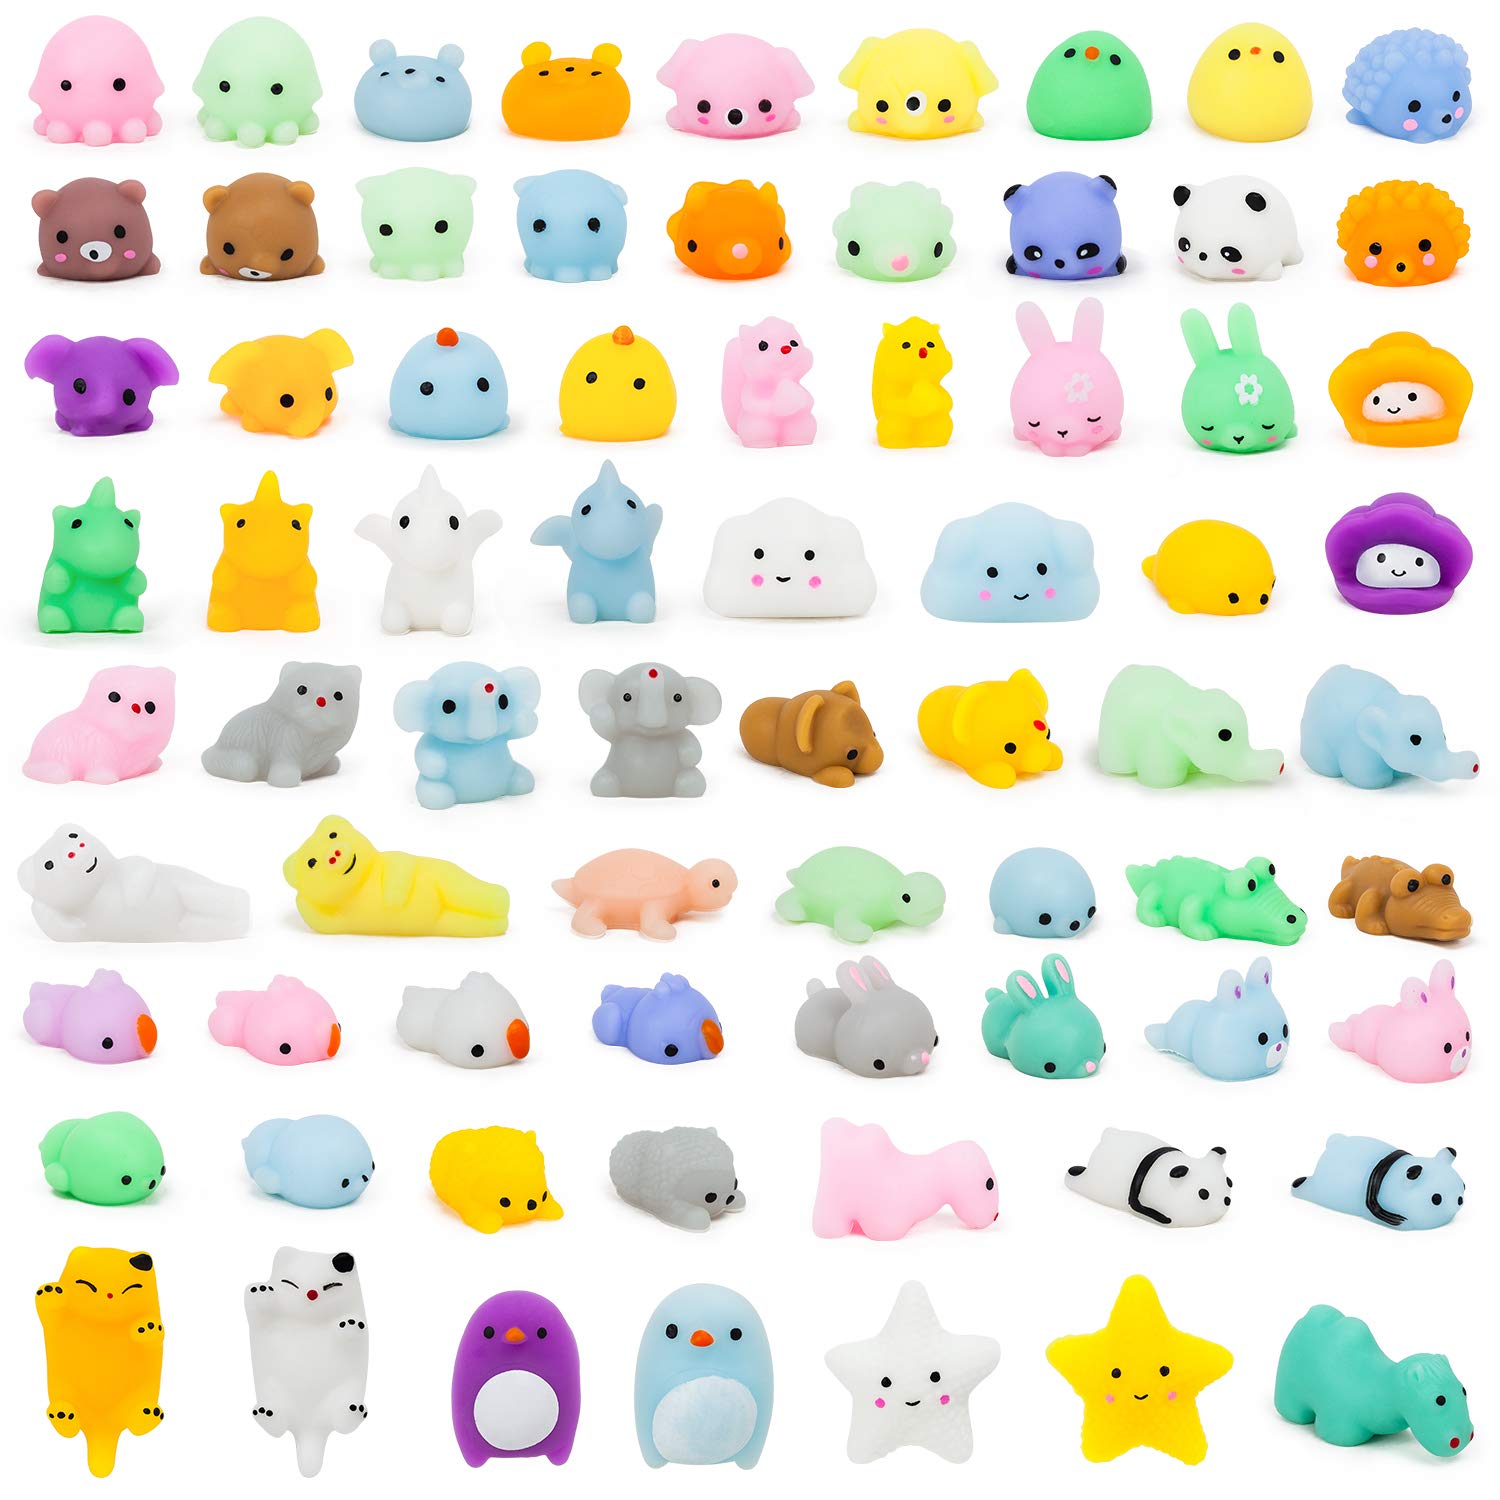 YIHONG 72 Pcs Kawaii Squishies, Mochi Squishy Toys for Kids Party Favors, Mini Stress Relief Toys for Halloween Christmas Easter Party Favors, Birthday Gifts, Classroom Prizes, Goodie Bag